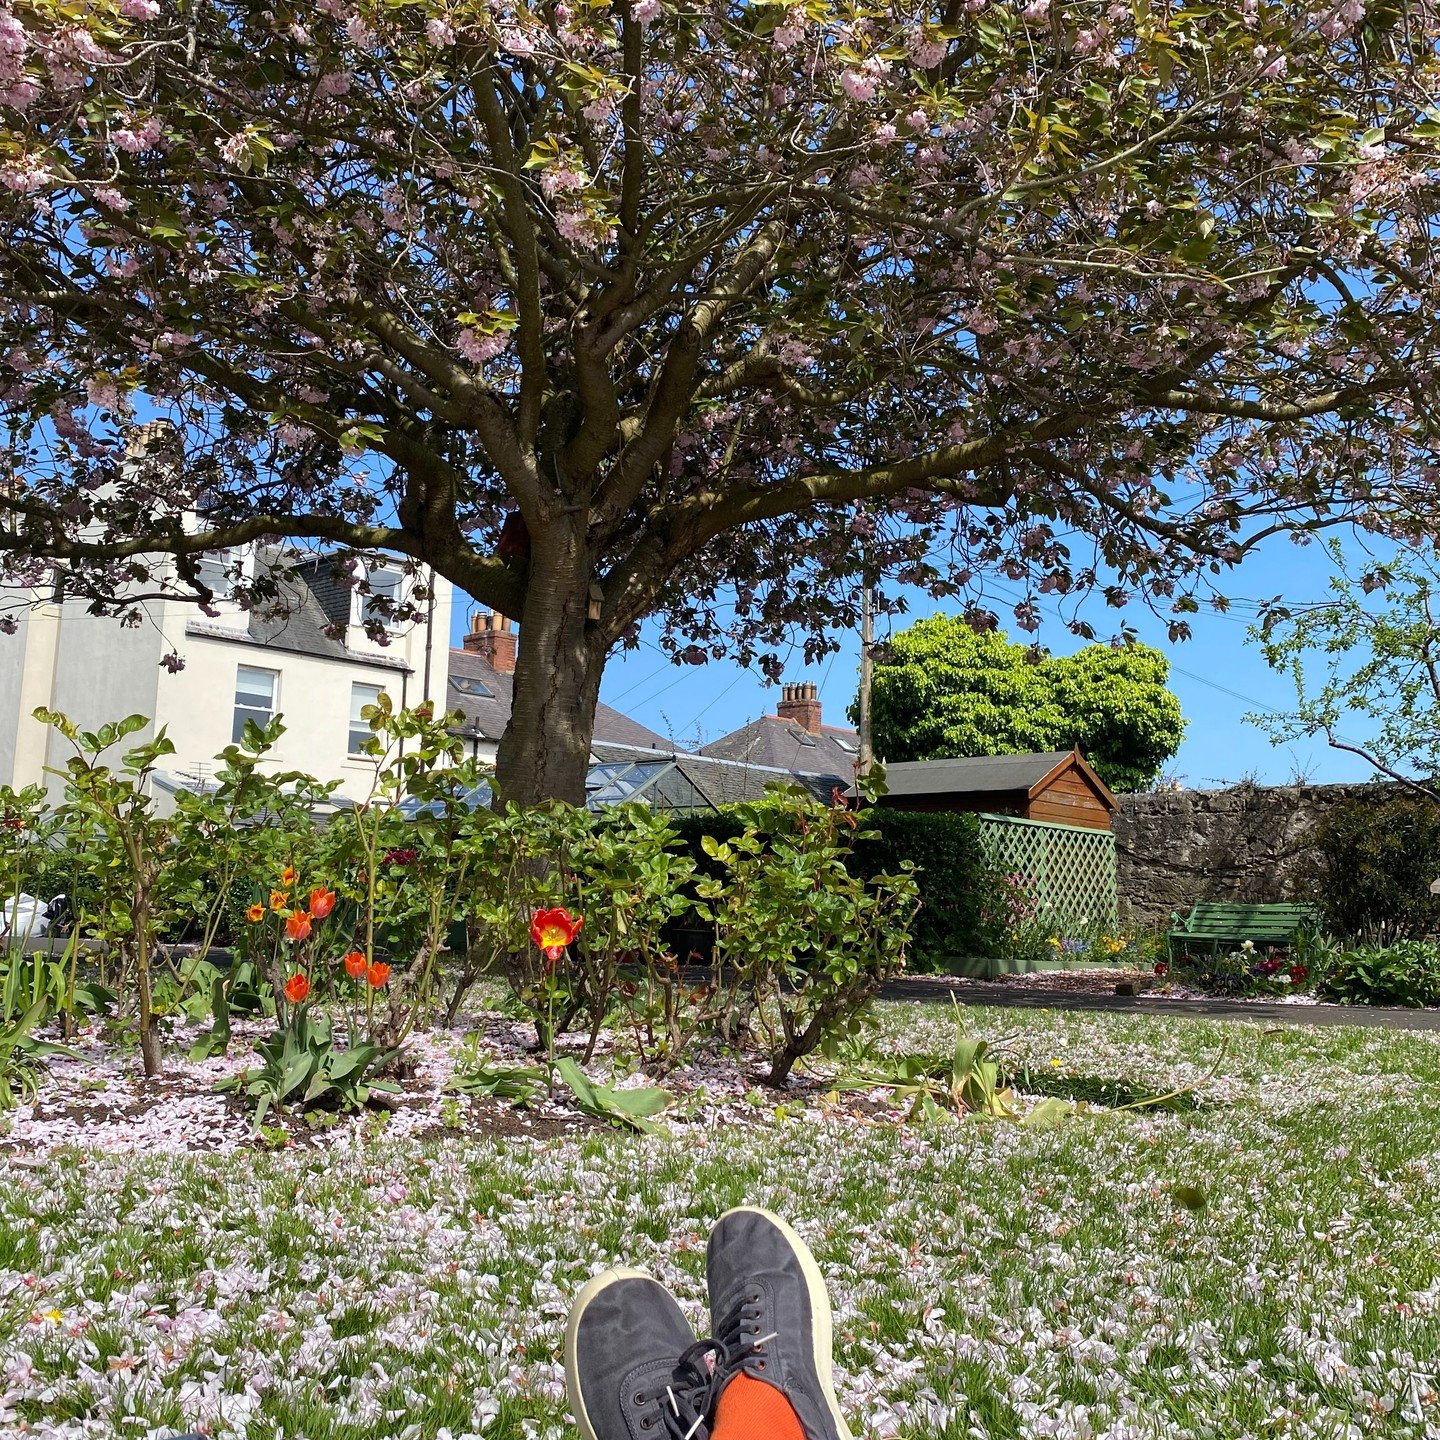 Yesterday I traded my usual schedule for an afternoon of bliss, soaking in the warm sunshine and watching the blossoms fall. In fact, we were in such a trance watching the blossoms and chatting that we stayed there for hours. No books, no phone scrol